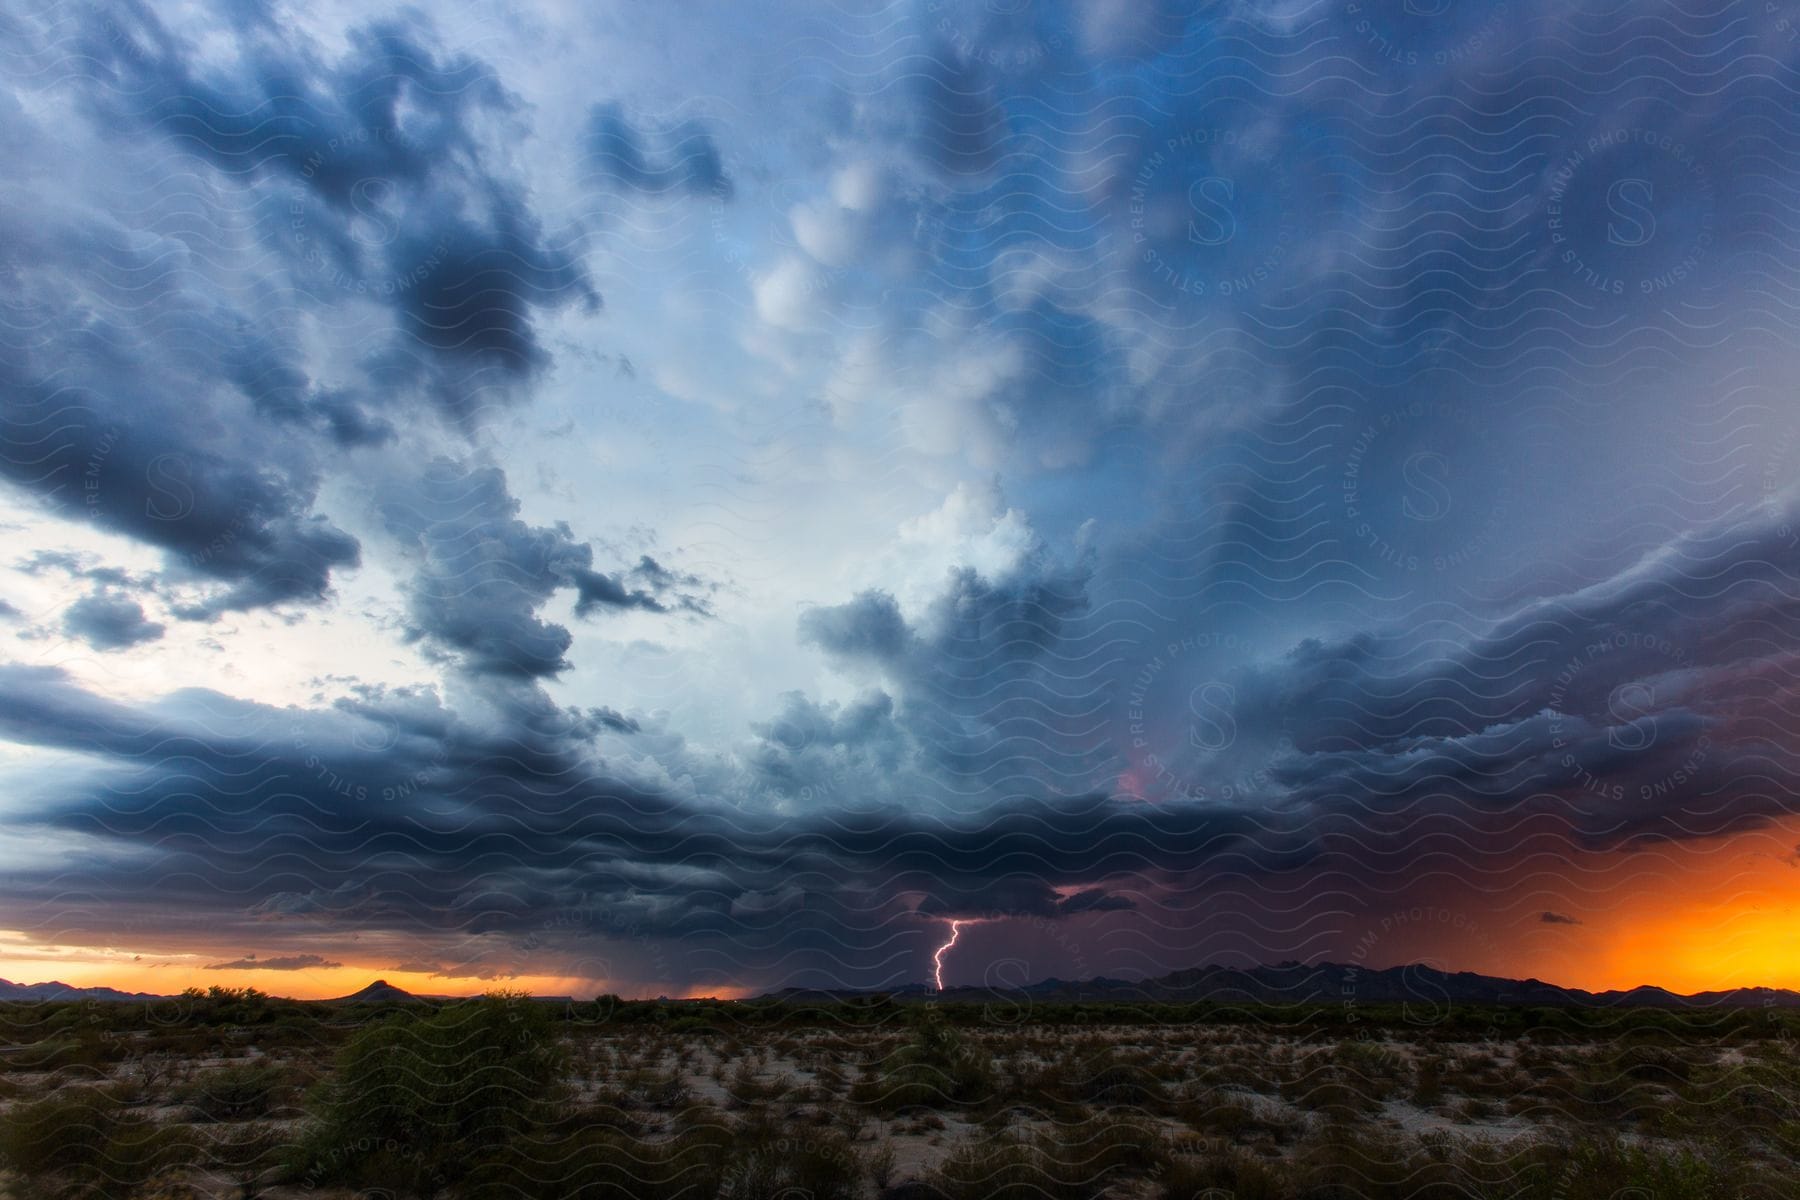 Dark storm clouds hang over the desert as lightning strikes over the mountains